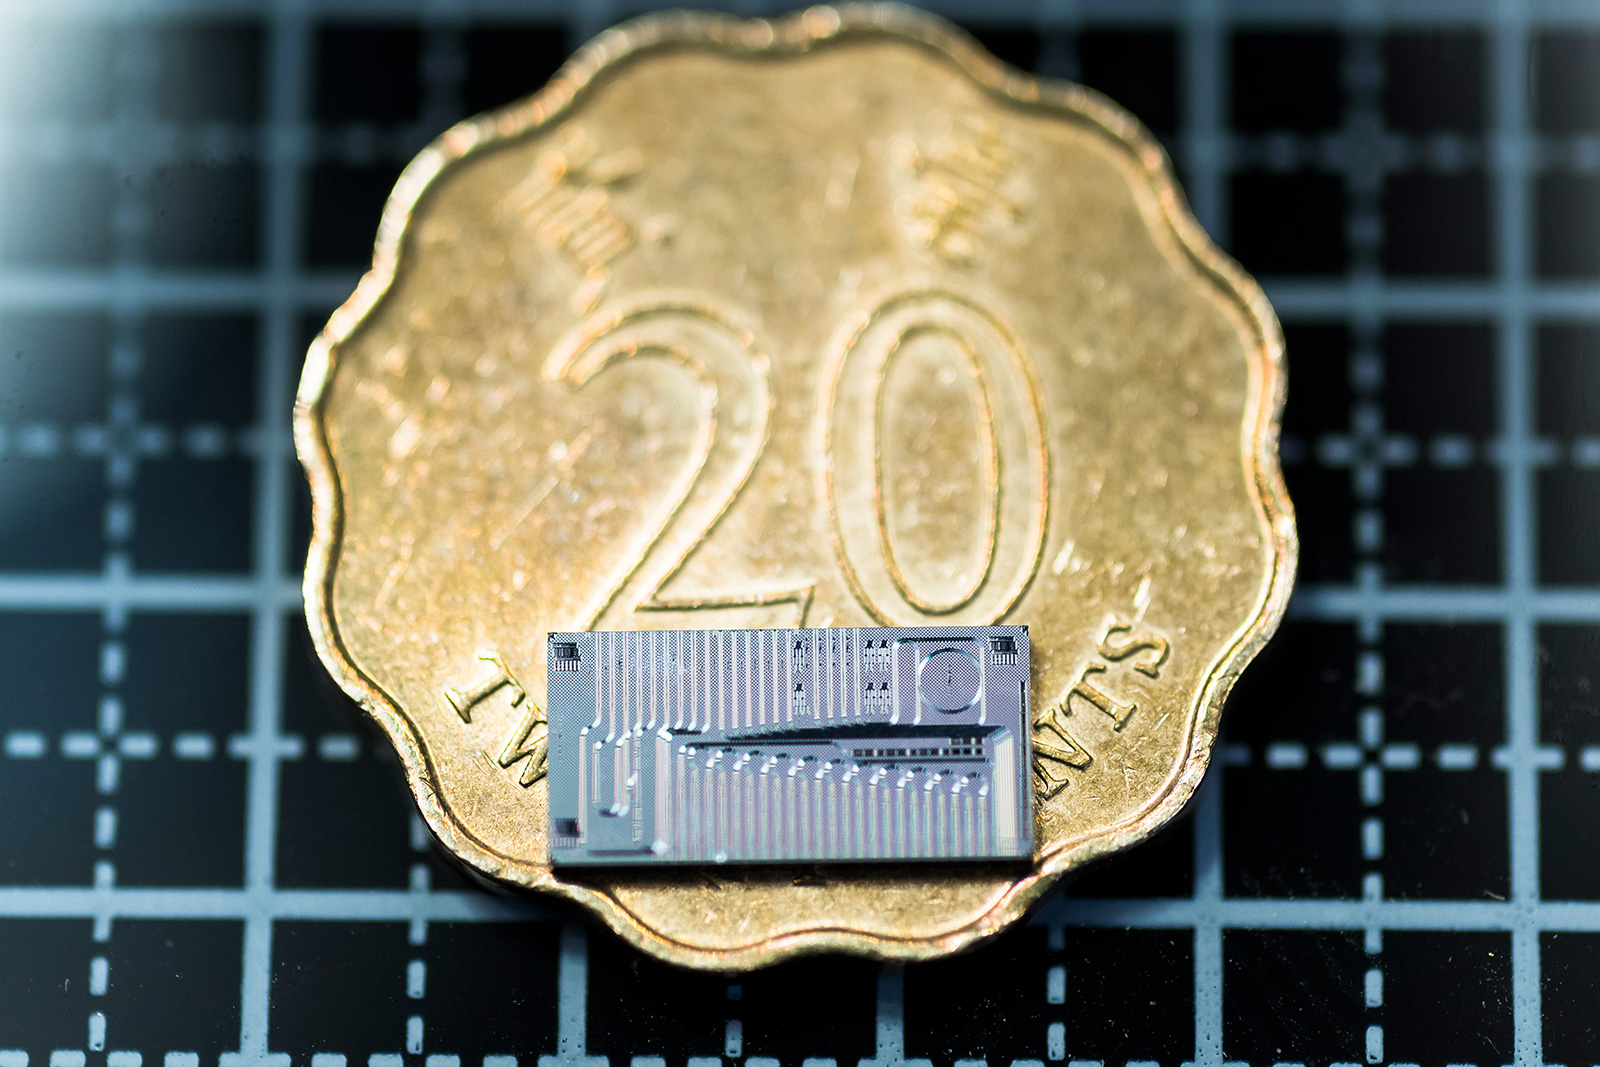 The micro-ring resonator chip used in the research.